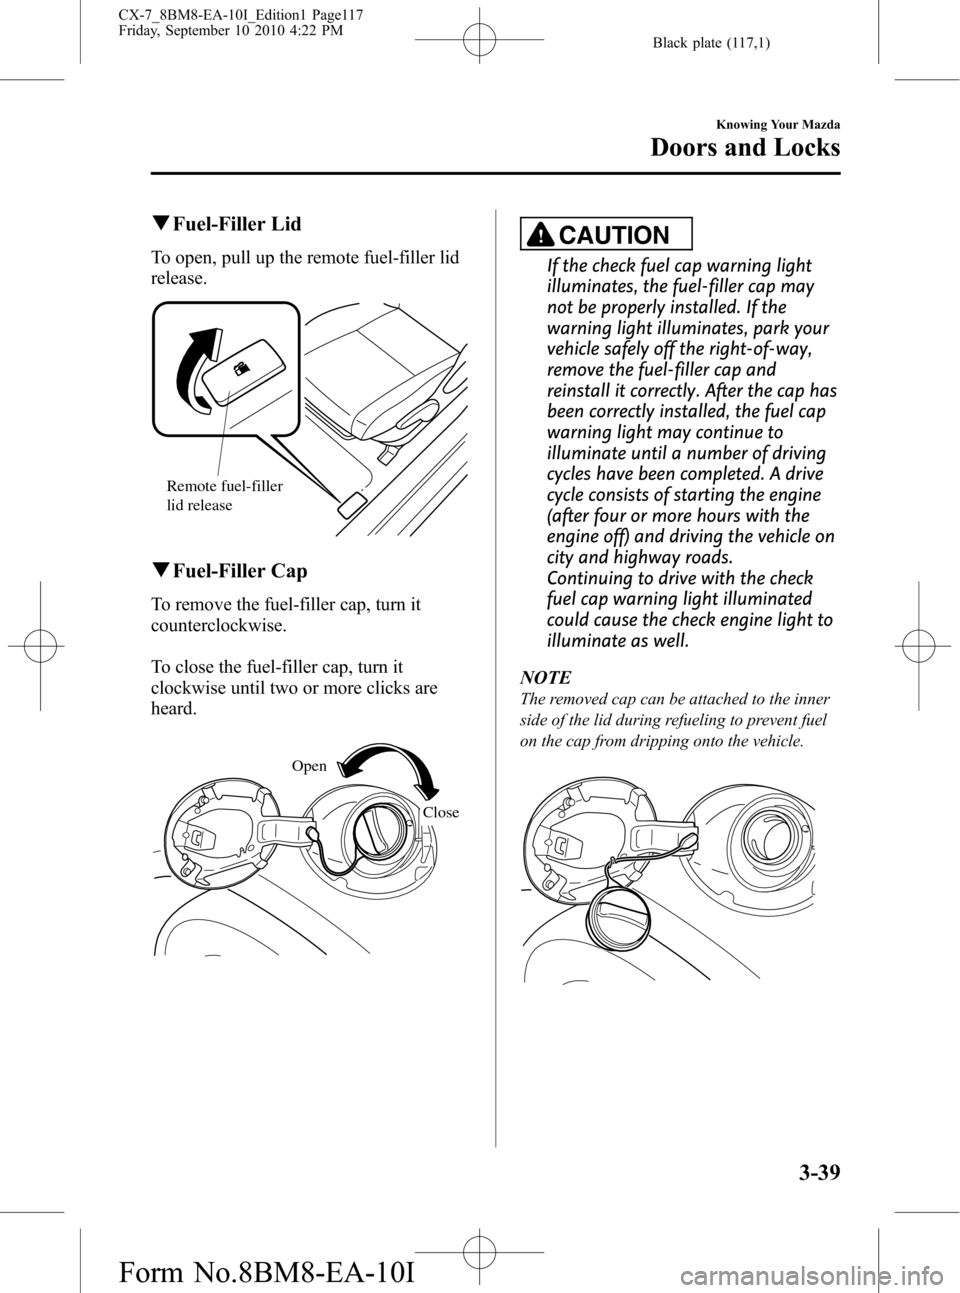 MAZDA MODEL CX-7 2011  Owners Manual (in English) Black plate (117,1)
qFuel-Filler Lid
To open, pull up the remote fuel-filler lid
release.
Remote fuel-filler 
lid release
qFuel-Filler Cap
To remove the fuel-filler cap, turn it
counterclockwise.
To c